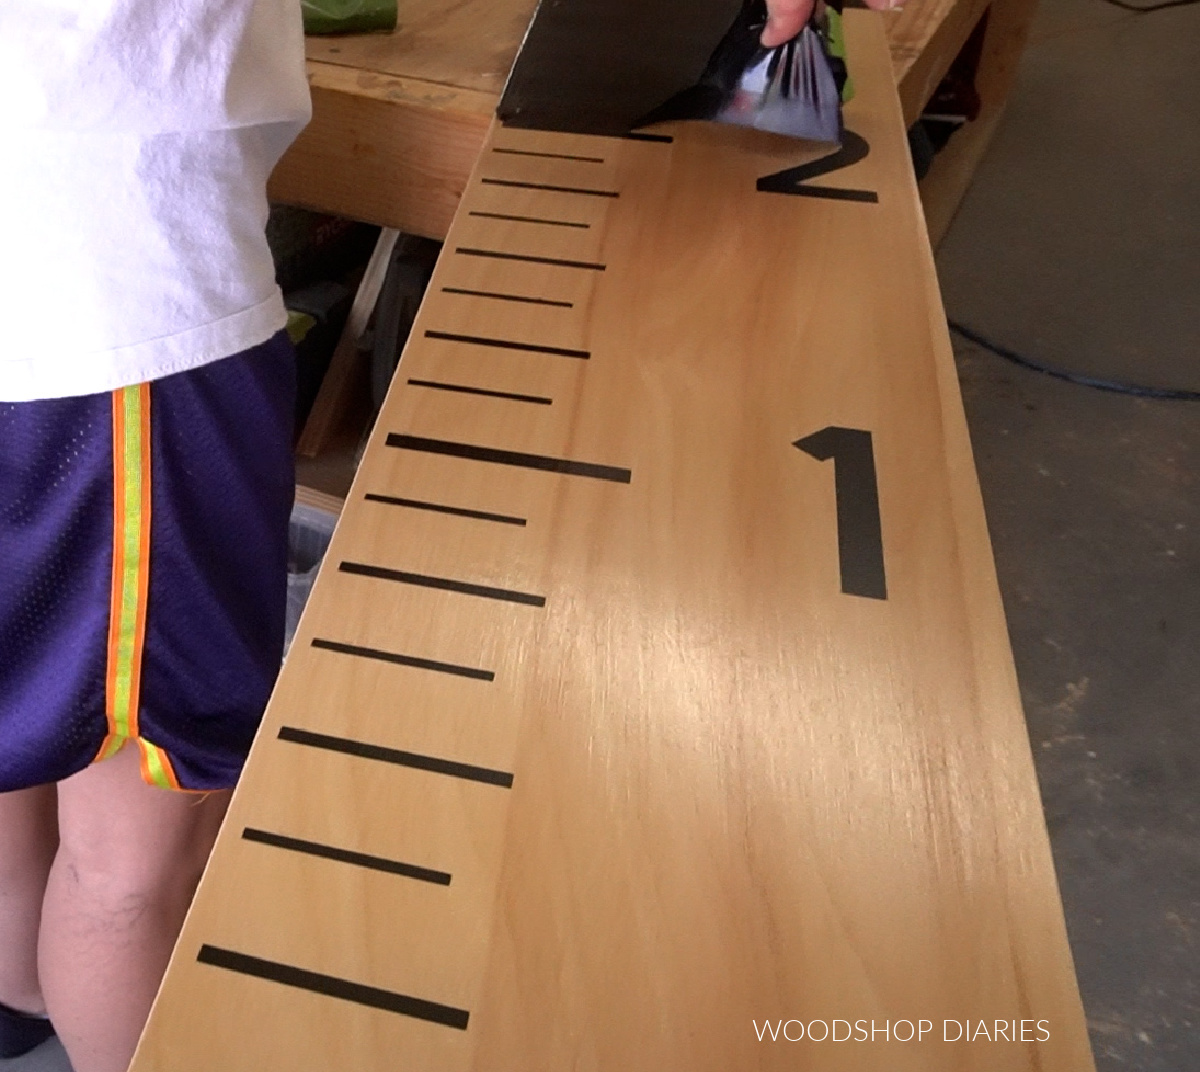 Shara Woodshop Diaries removing vinyl stencil from life size ruler board to reveal marks and numbers